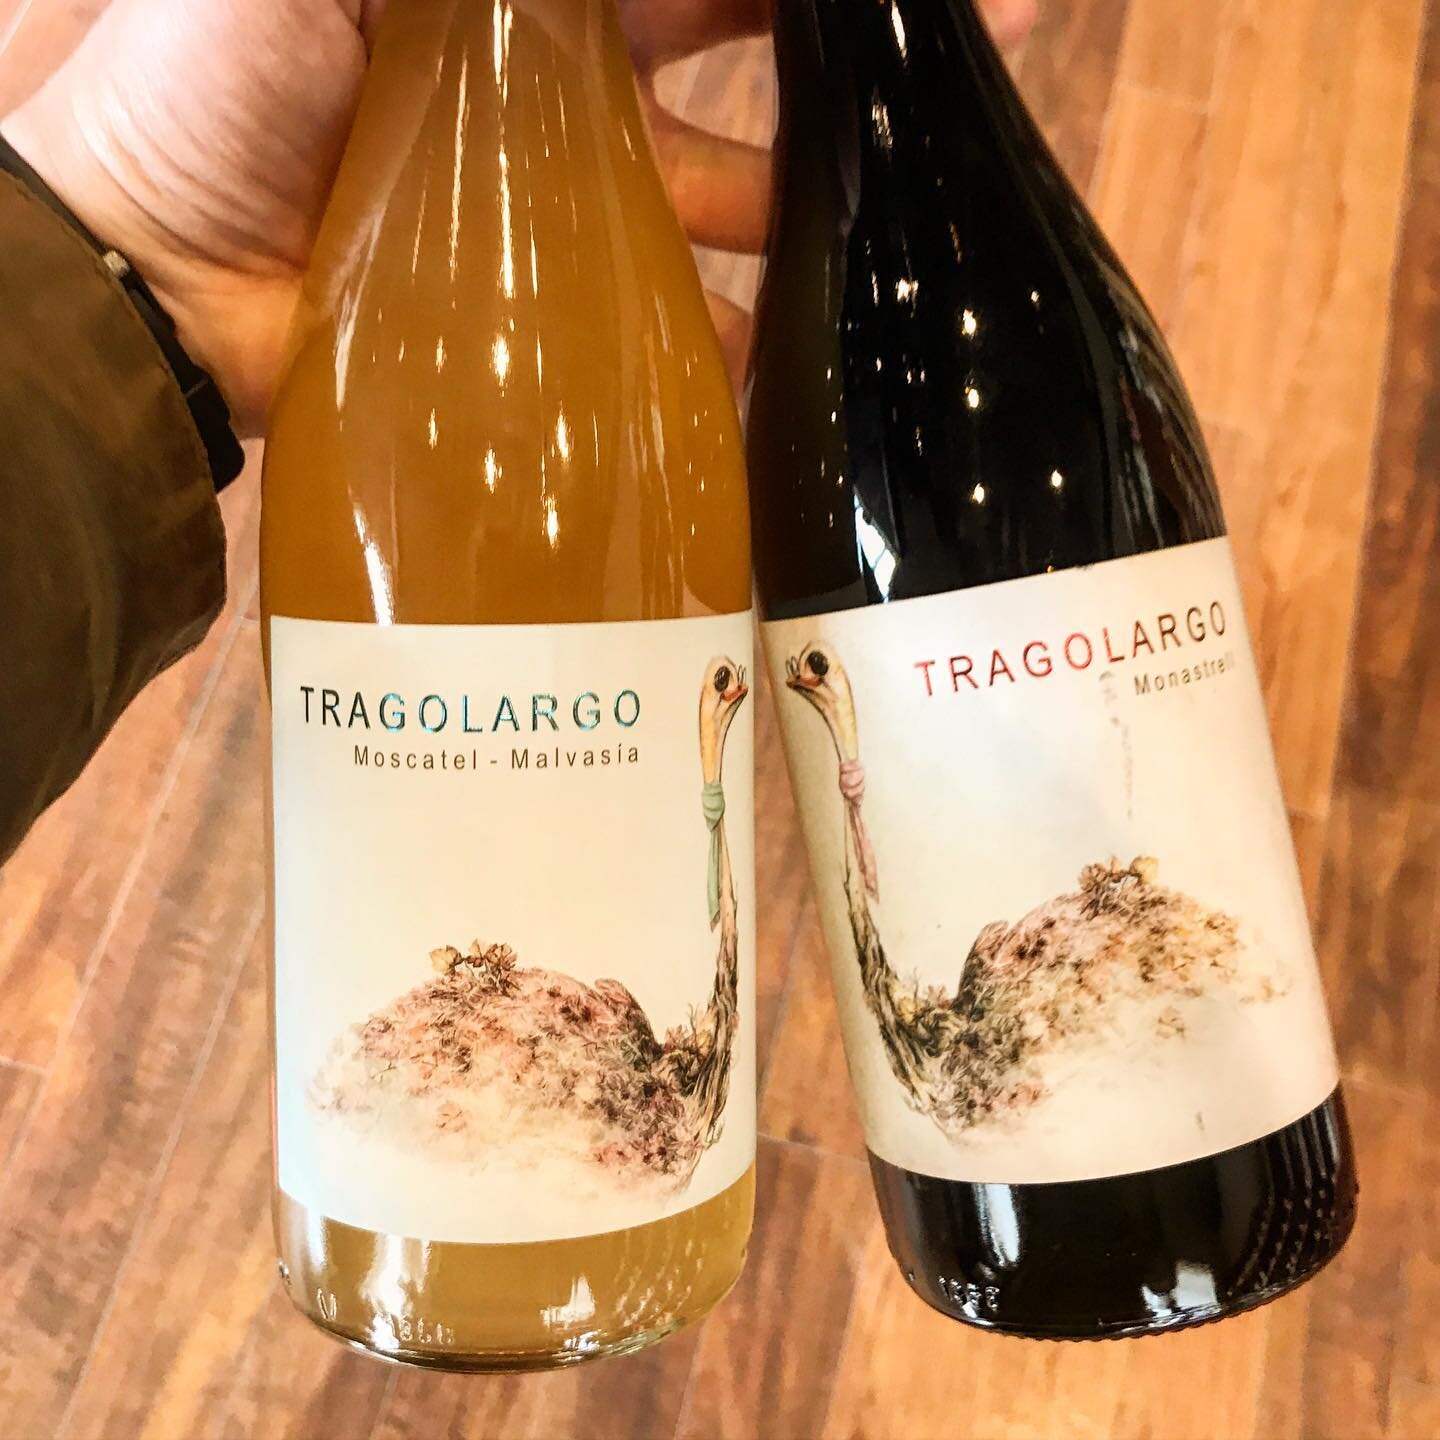 Here are some lovely wines for you on this dreary day

Tragolago Blanco: This orange wine is explosively aromatic and fruity. Made from Moscatel and Malvasia grapes from very sandy, saline soils. Grapes are naturally fermented on their skins for 30 d